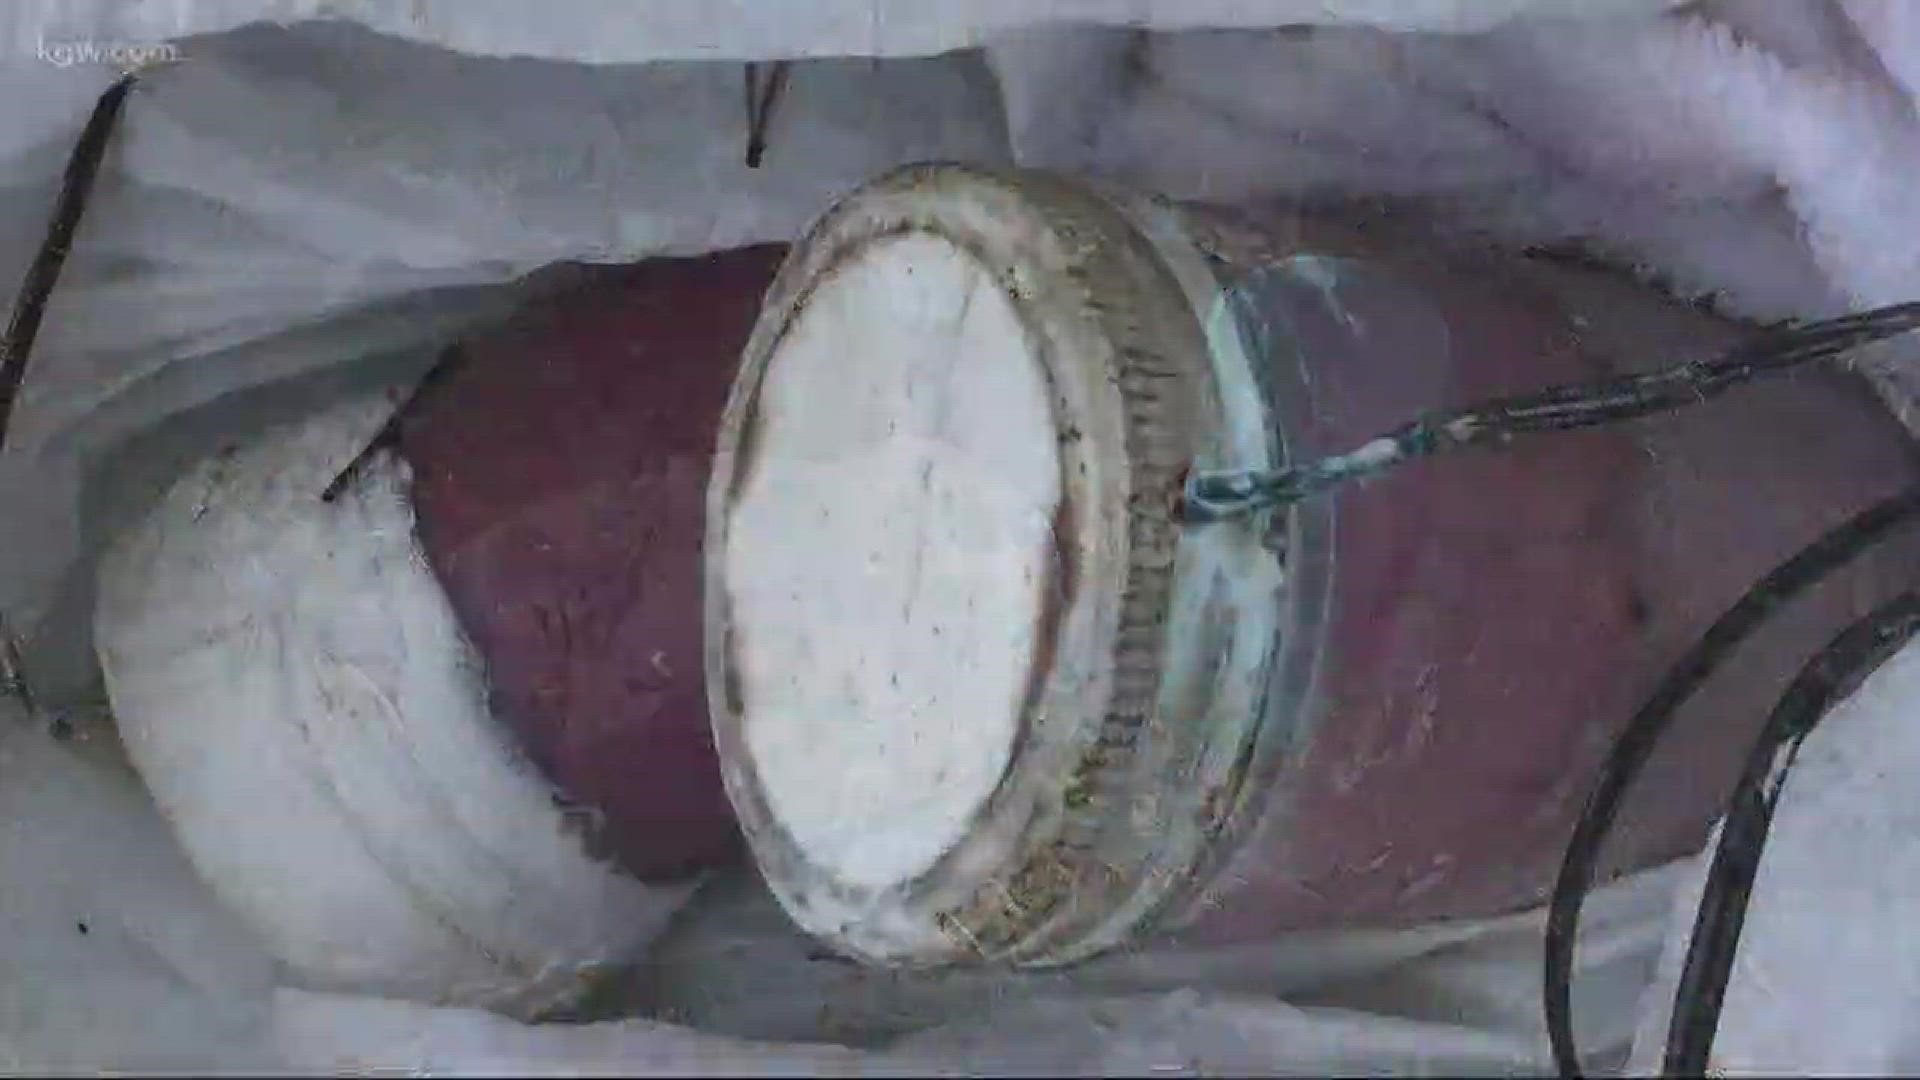 Some homemade bombs were spotted in Long Beach.